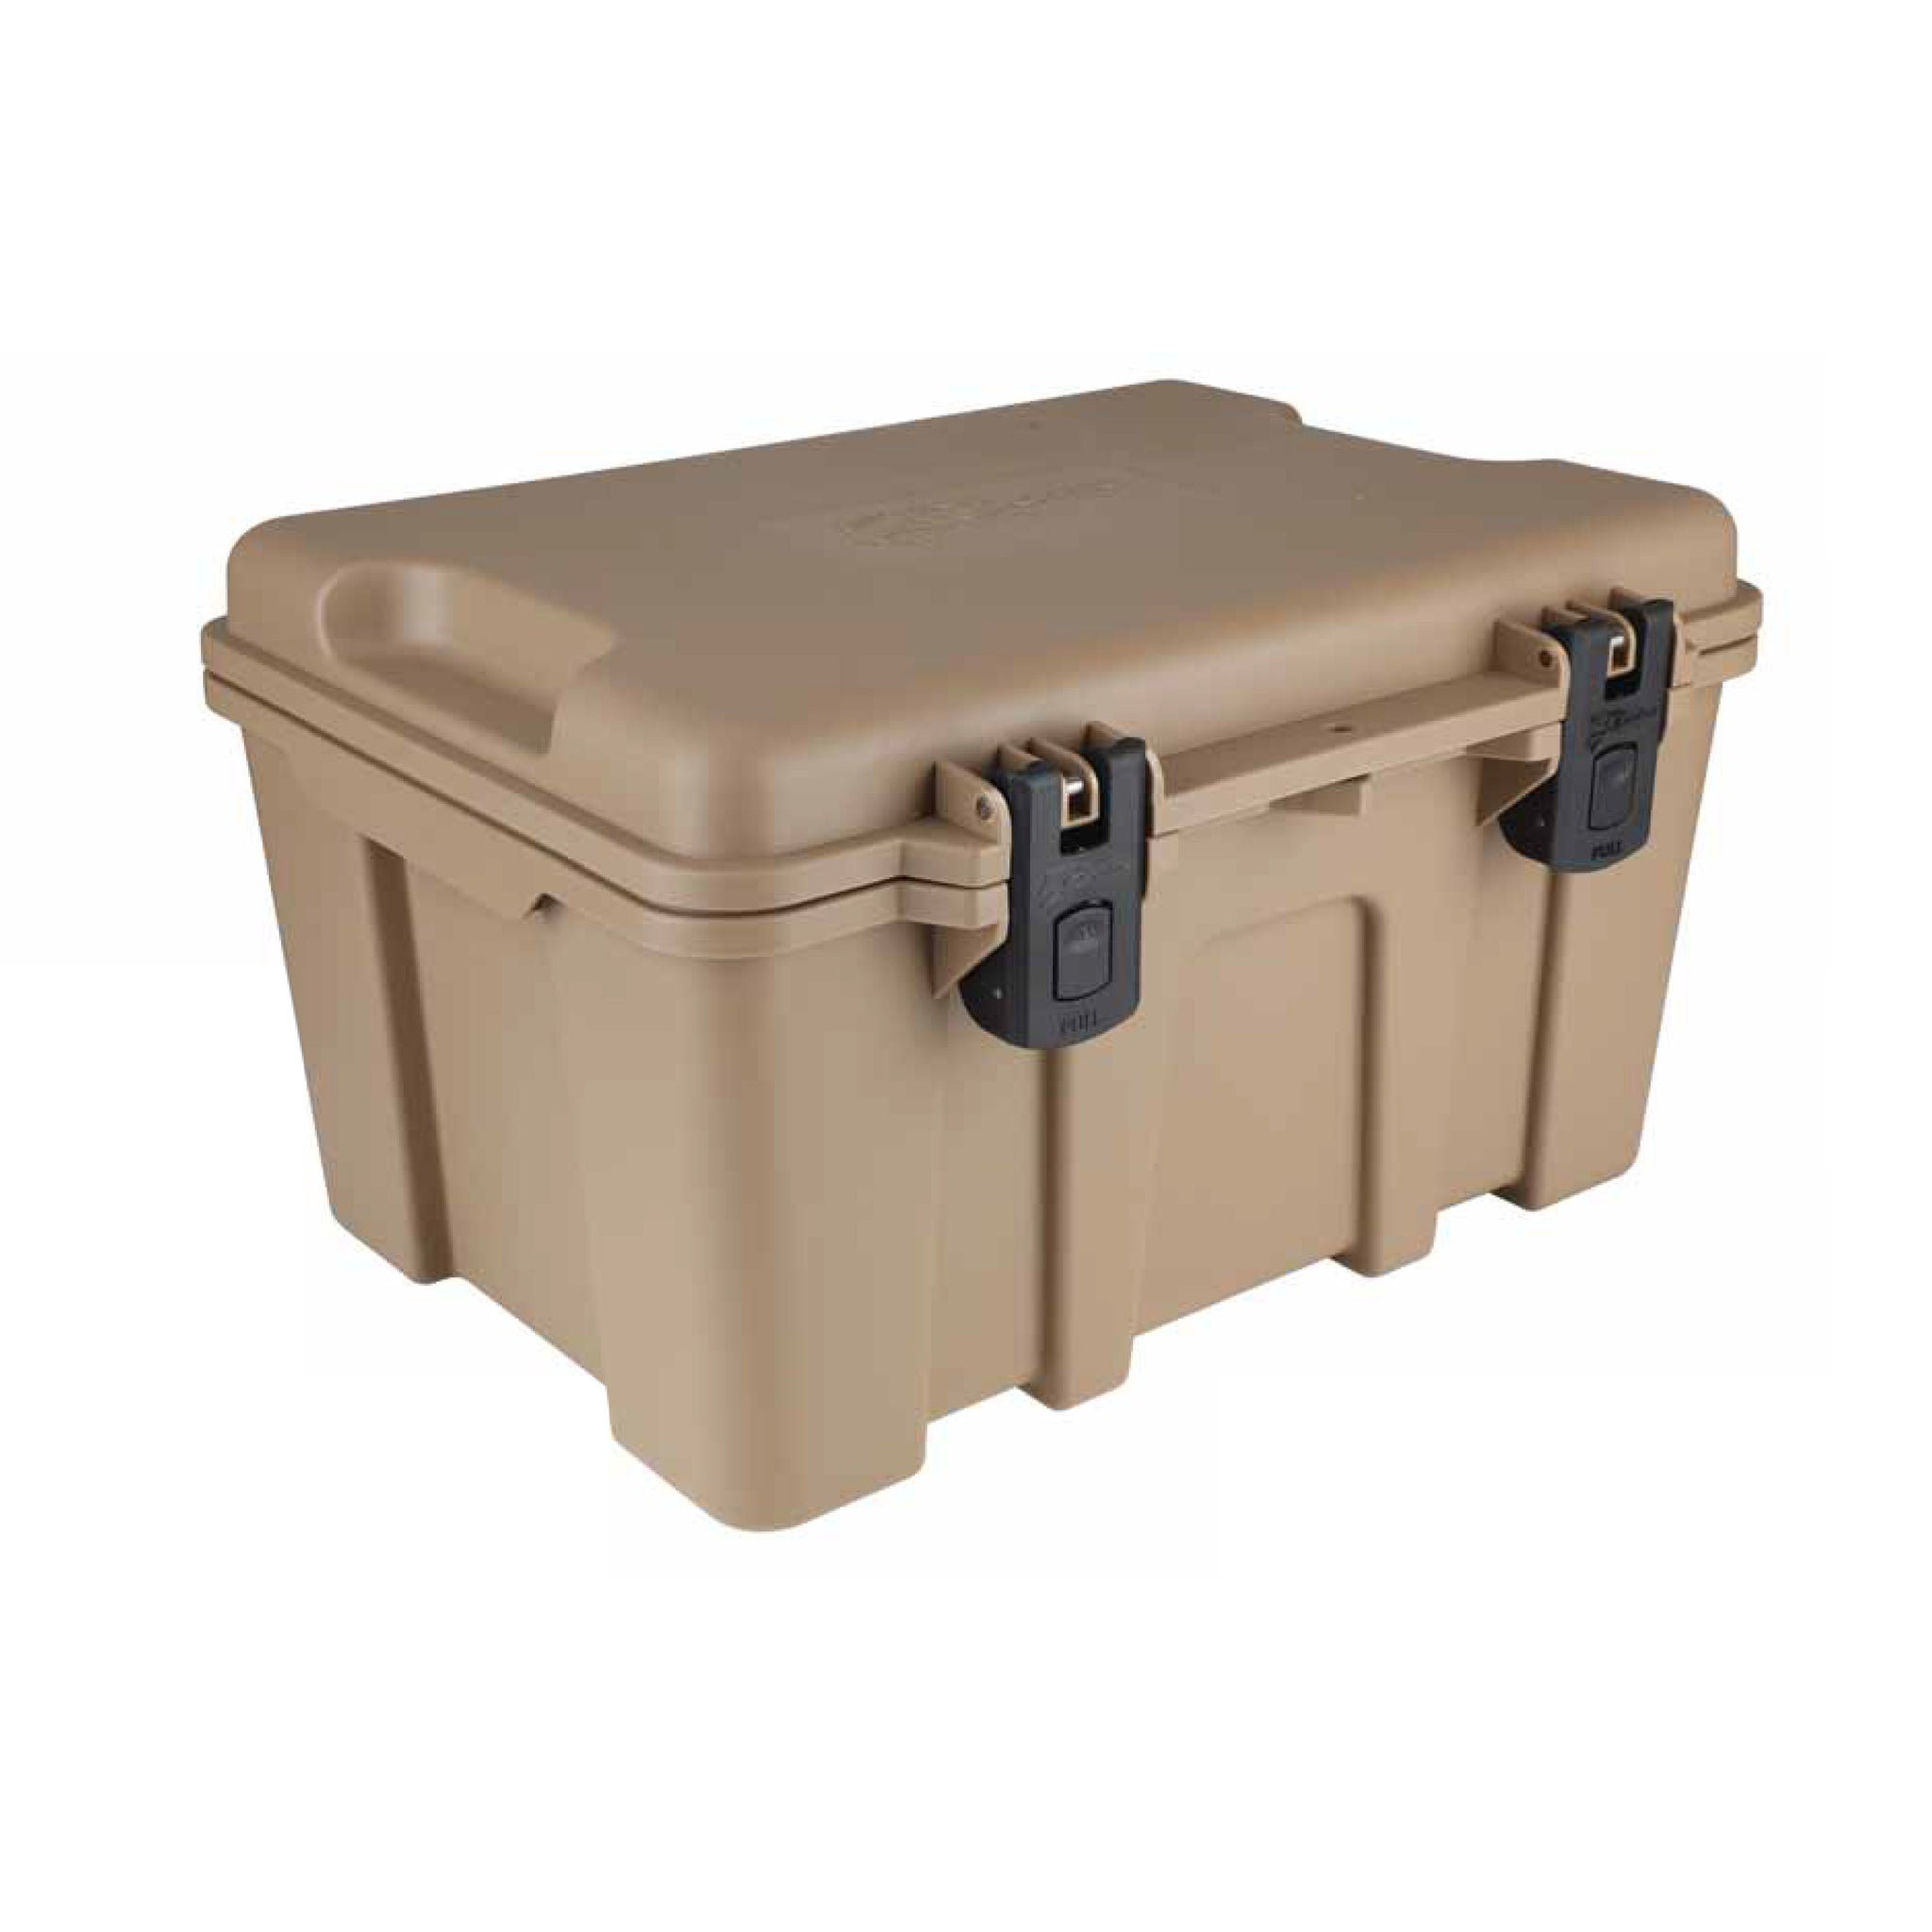 Coho Pack and Carry Box, L14.88 x W19.09 x H11 IP67 – Coho Outdoors